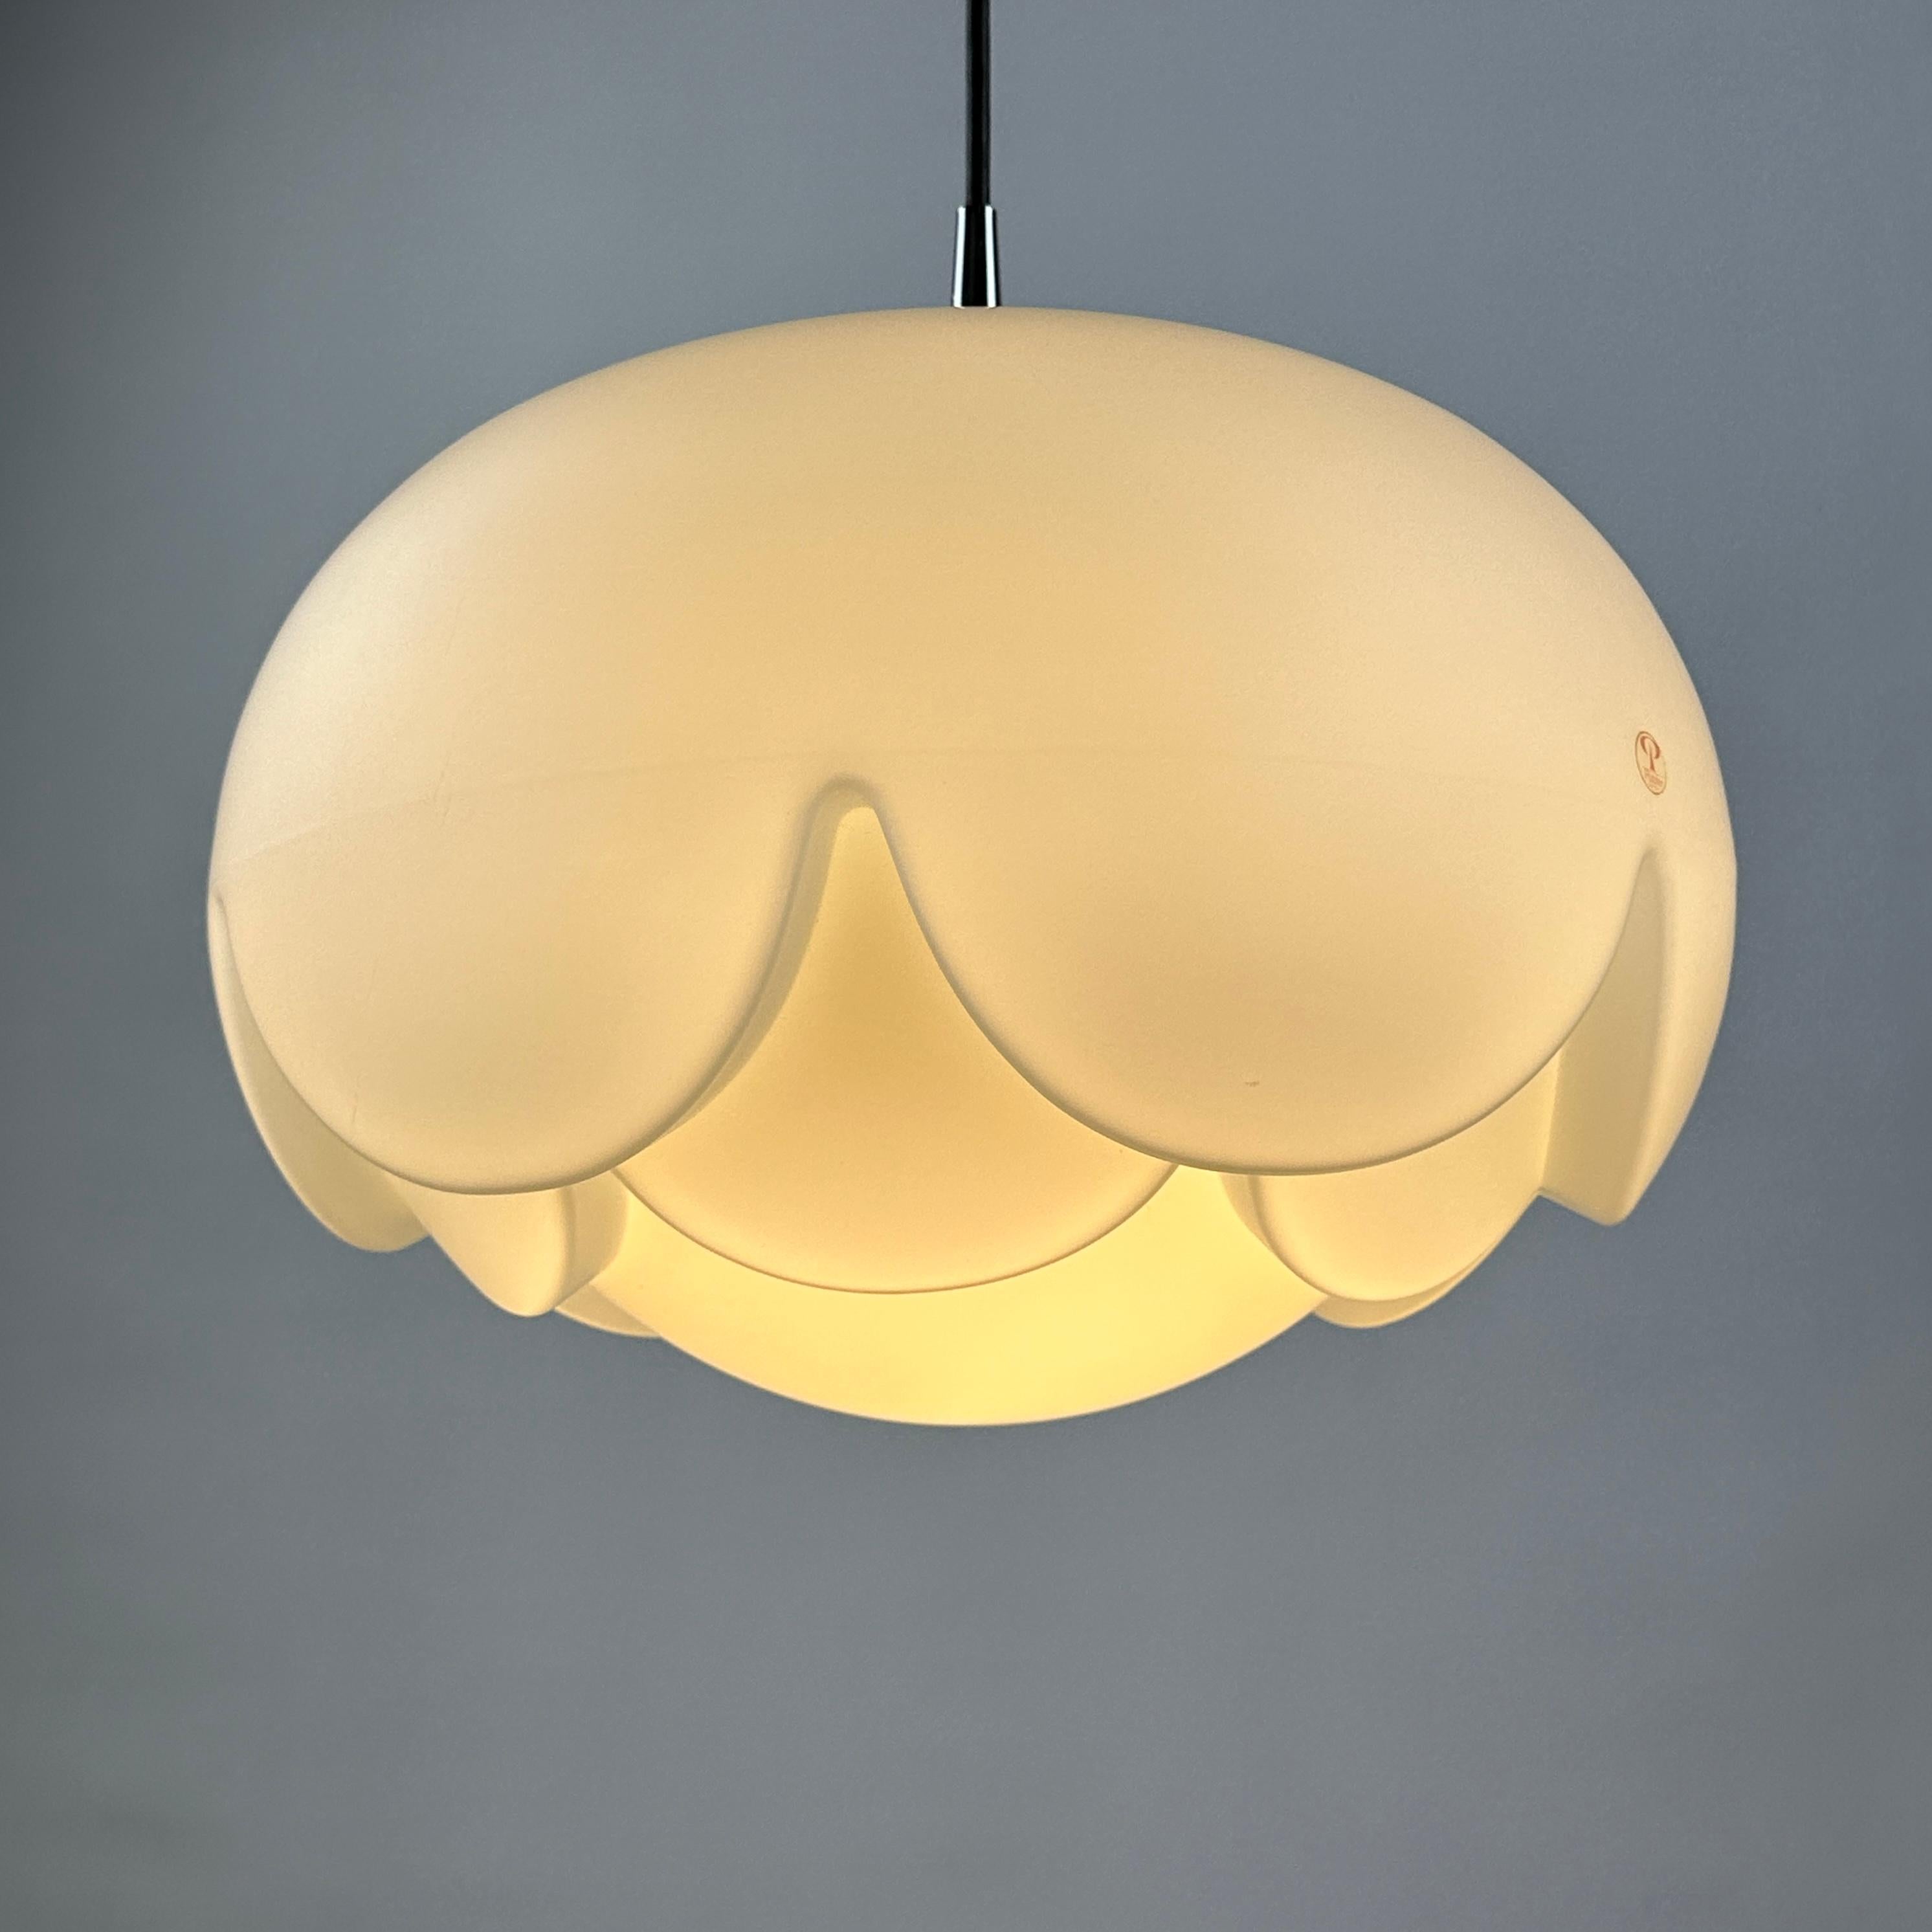 The Artichoke! This fantastic pendant light is manufactured by Peill & Putzler from Germany around 1970. This is the largest variant of the series and is shaped like a kind of flower, seerose or artichoke. Made of frosted glass and has a chrome